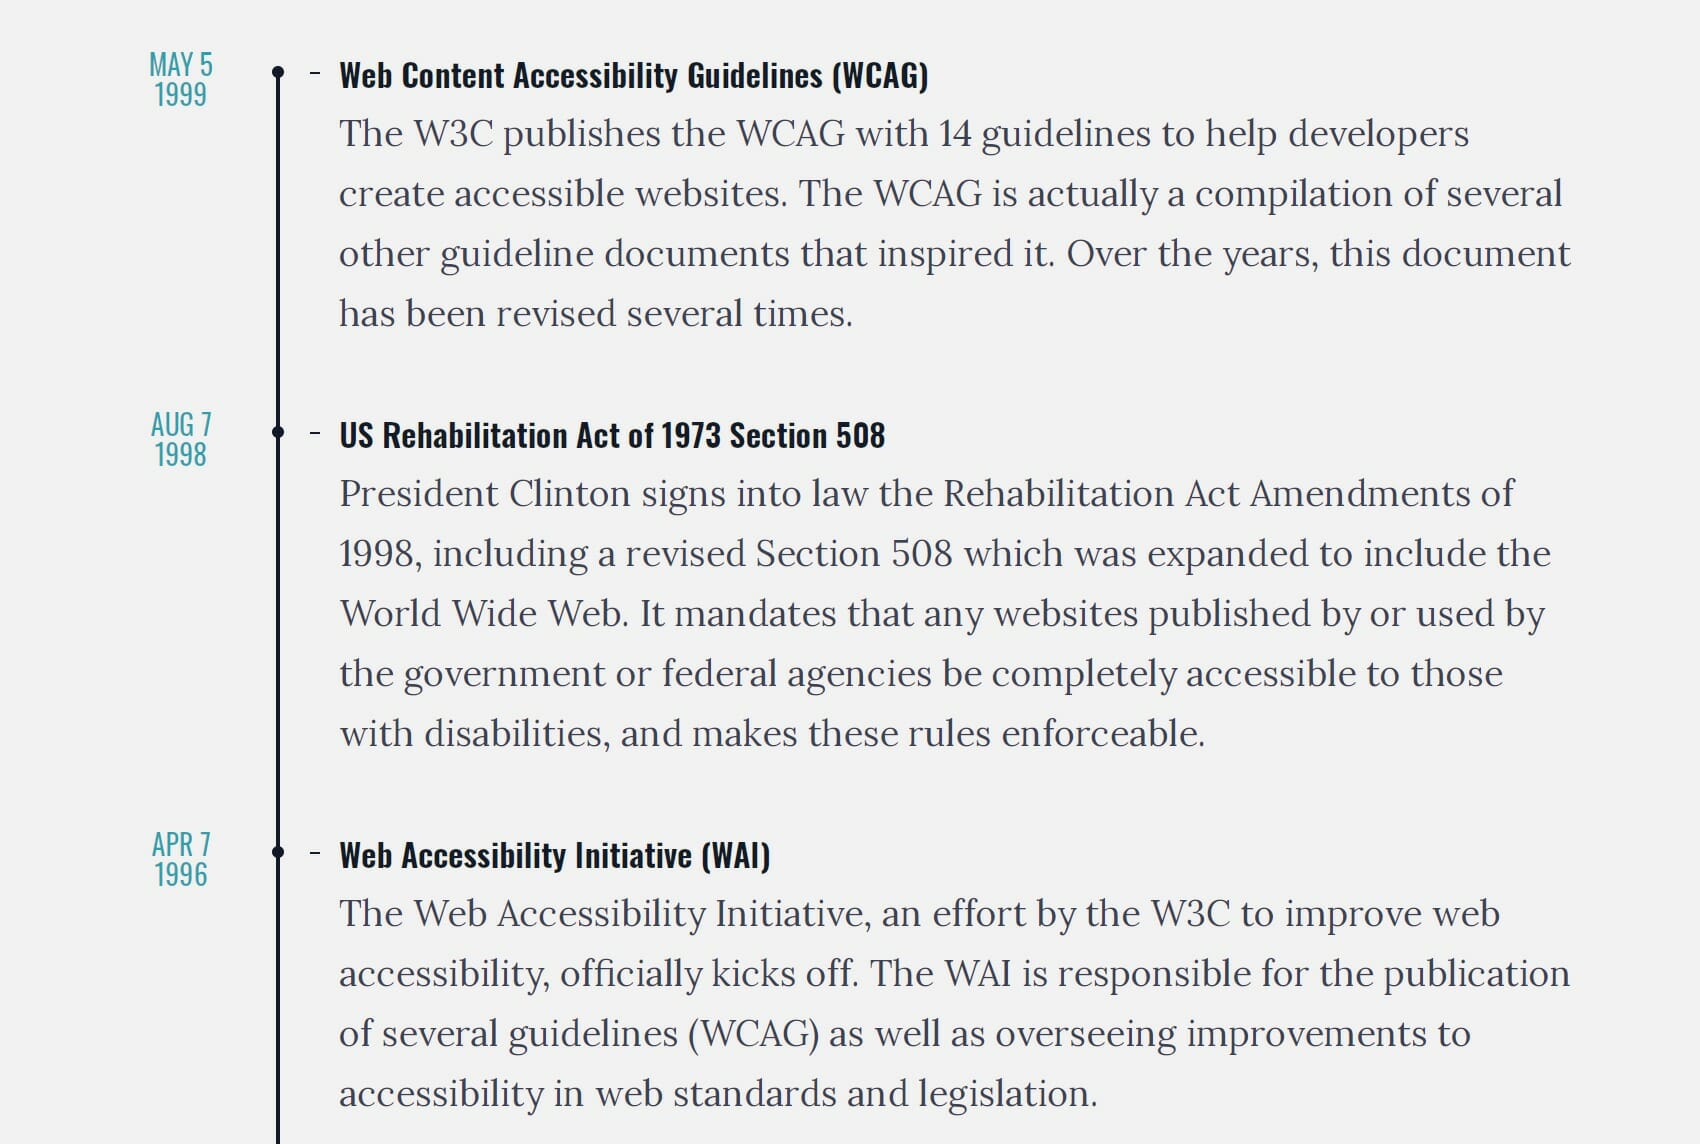 1996: Web Accessibility Initiative kicks off, 1998: US Rehabilitation Act of 1973 Section 508 becomes law, 1999: W3C publishes Web Content Accessibility Guidelines